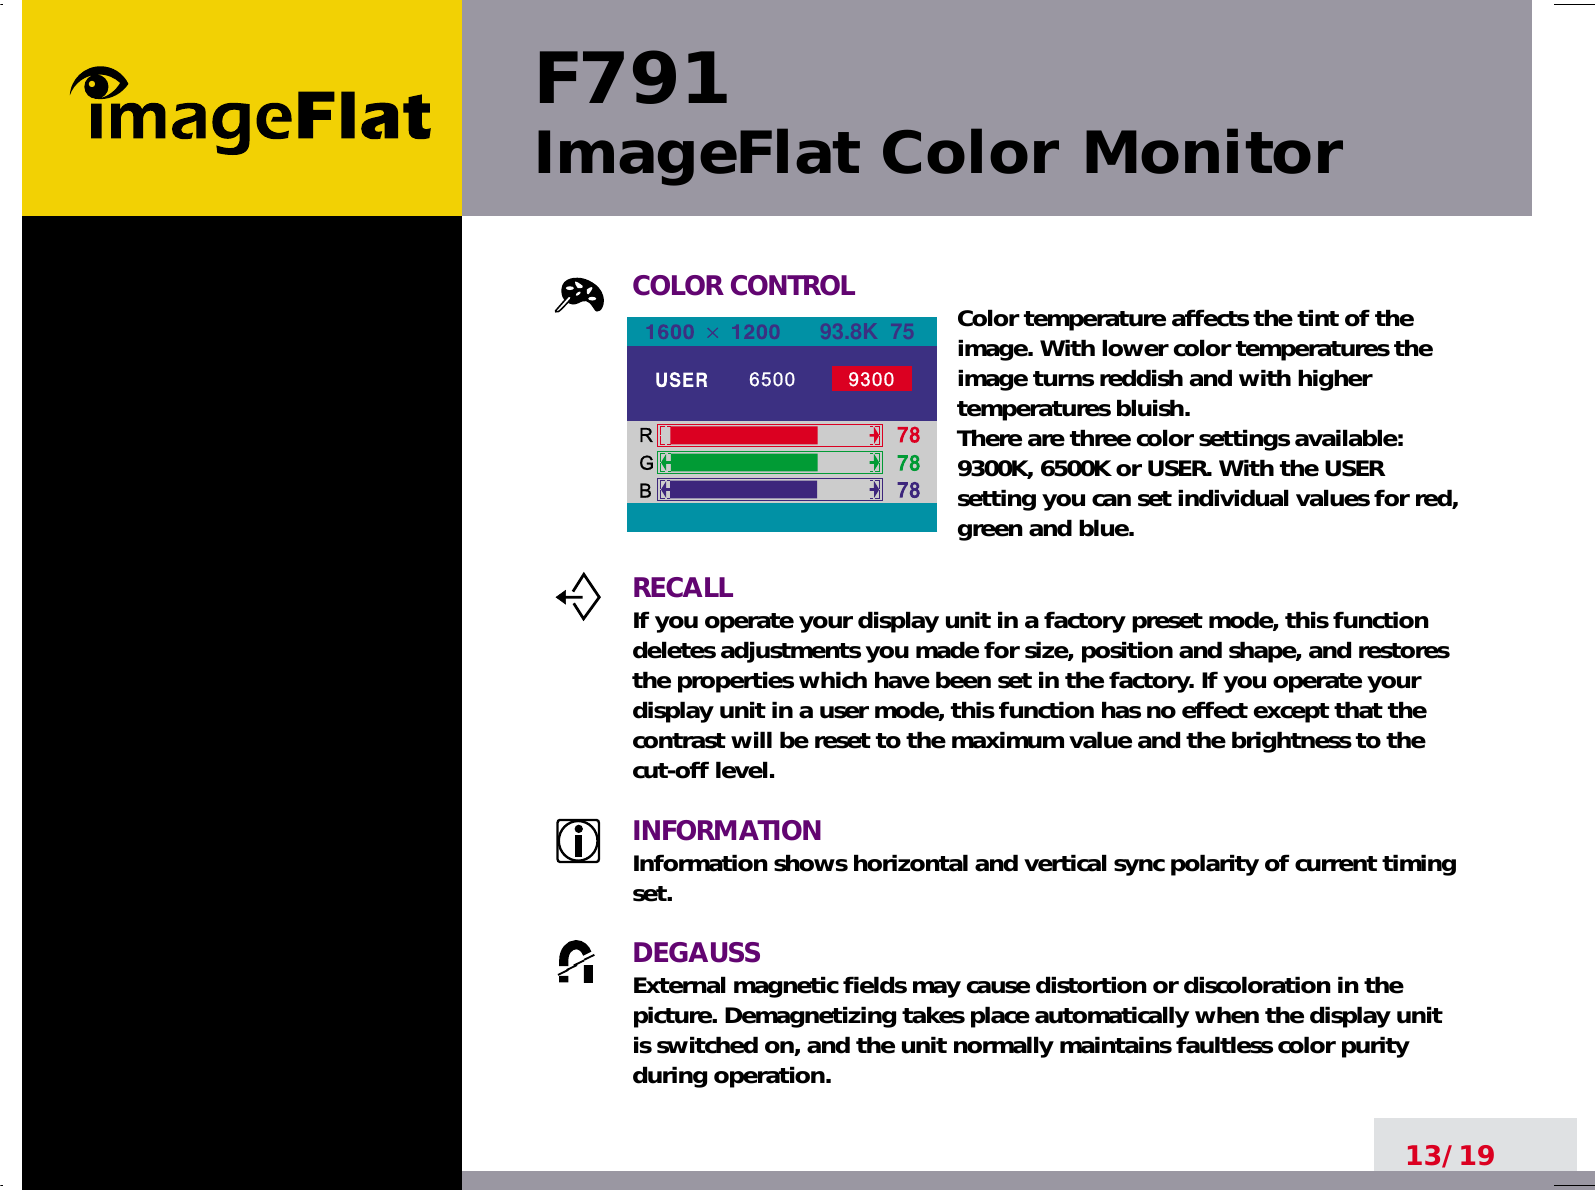 F791ImageFlat Color Monitor13/19COLOR CONTROL Color temperature affects the tint of theimage. With lower color temperatures theimage turns reddish and with highertemperatures bluish.There are three color settings available:9300K, 6500K or USER. With the USERsetting you can set individual values for red,green and blue.RECALLIf you operate your display unit in a factory preset mode, this functiondeletes adjustments you made for size, position and shape, and restoresthe properties which have been set in the factory. If you operate yourdisplay unit in a user mode, this function has no effect except that thecontrast will be reset to the maximum value and the brightness to thecut-off level.INFORMATIONInformation shows horizontal and vertical sync polarity of current timingset.DEGAUSSExternal magnetic fields may cause distortion or discoloration in thepicture. Demagnetizing takes place automatically when the display unitis switched on, and the unit normally maintains faultless color purityduring operation.93.8K  75